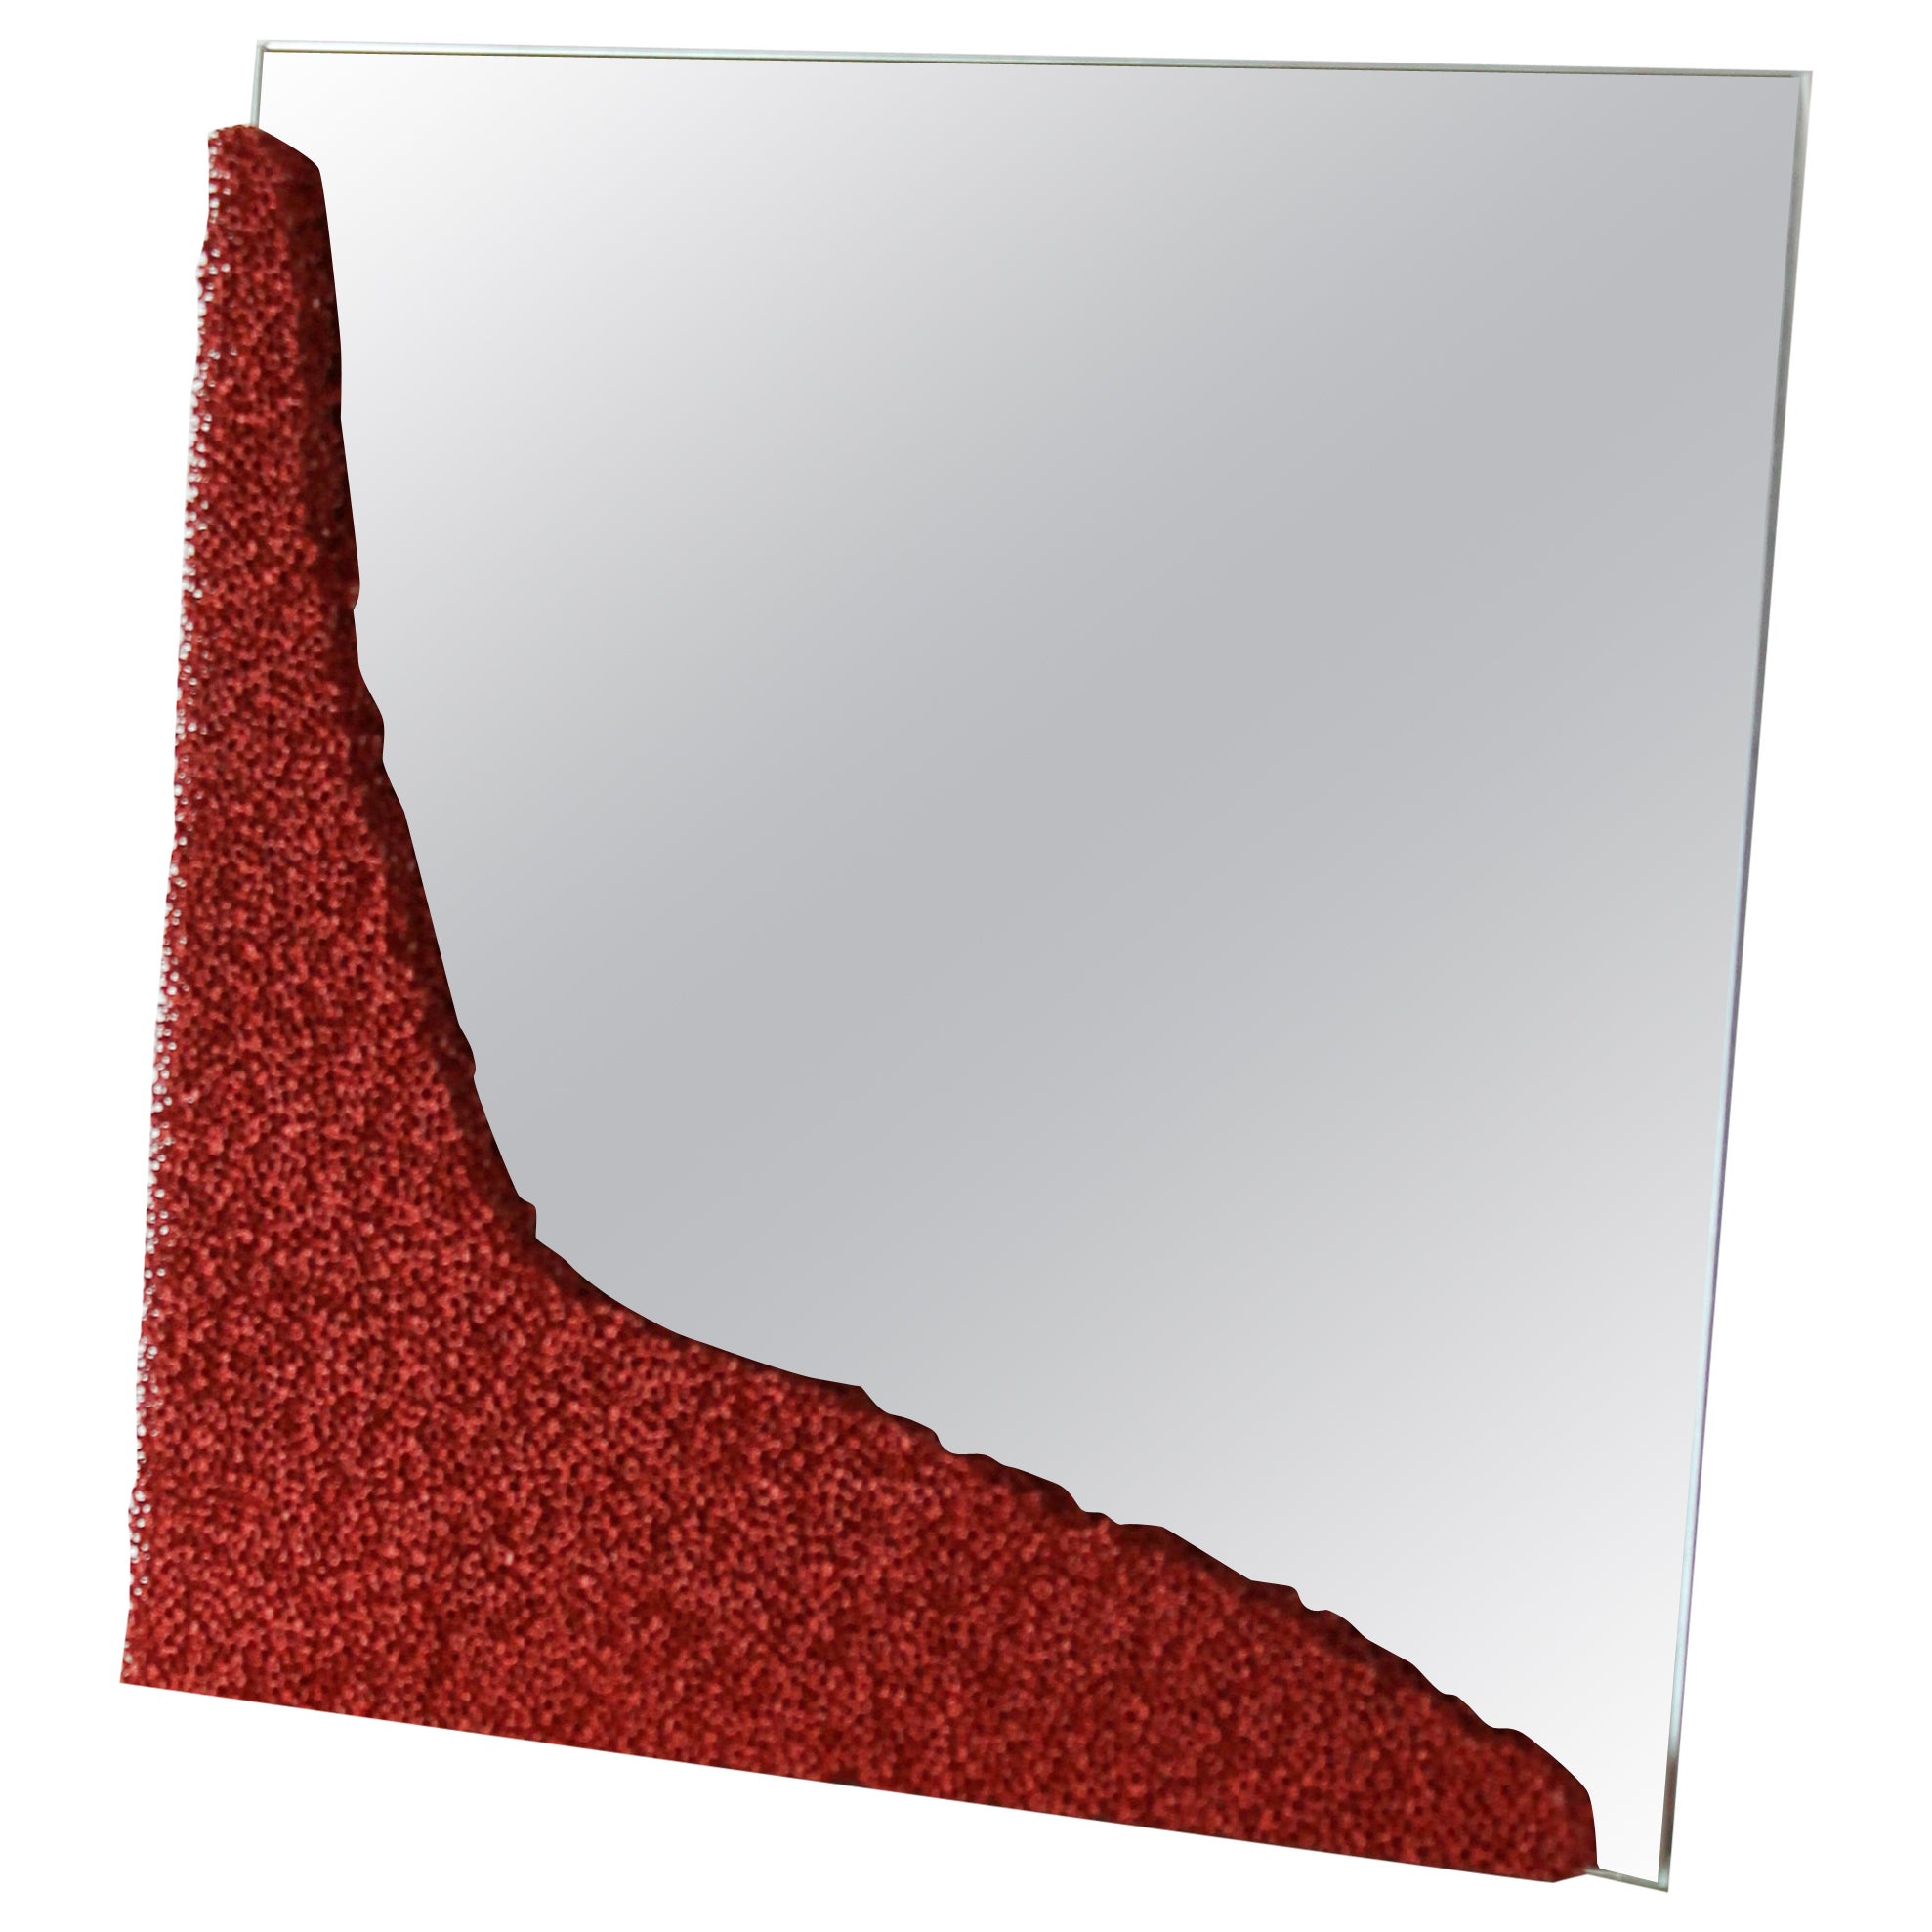 SS, Small Square, Ceramic Foam Hanging Mirror by Jordan Keaney For Sale